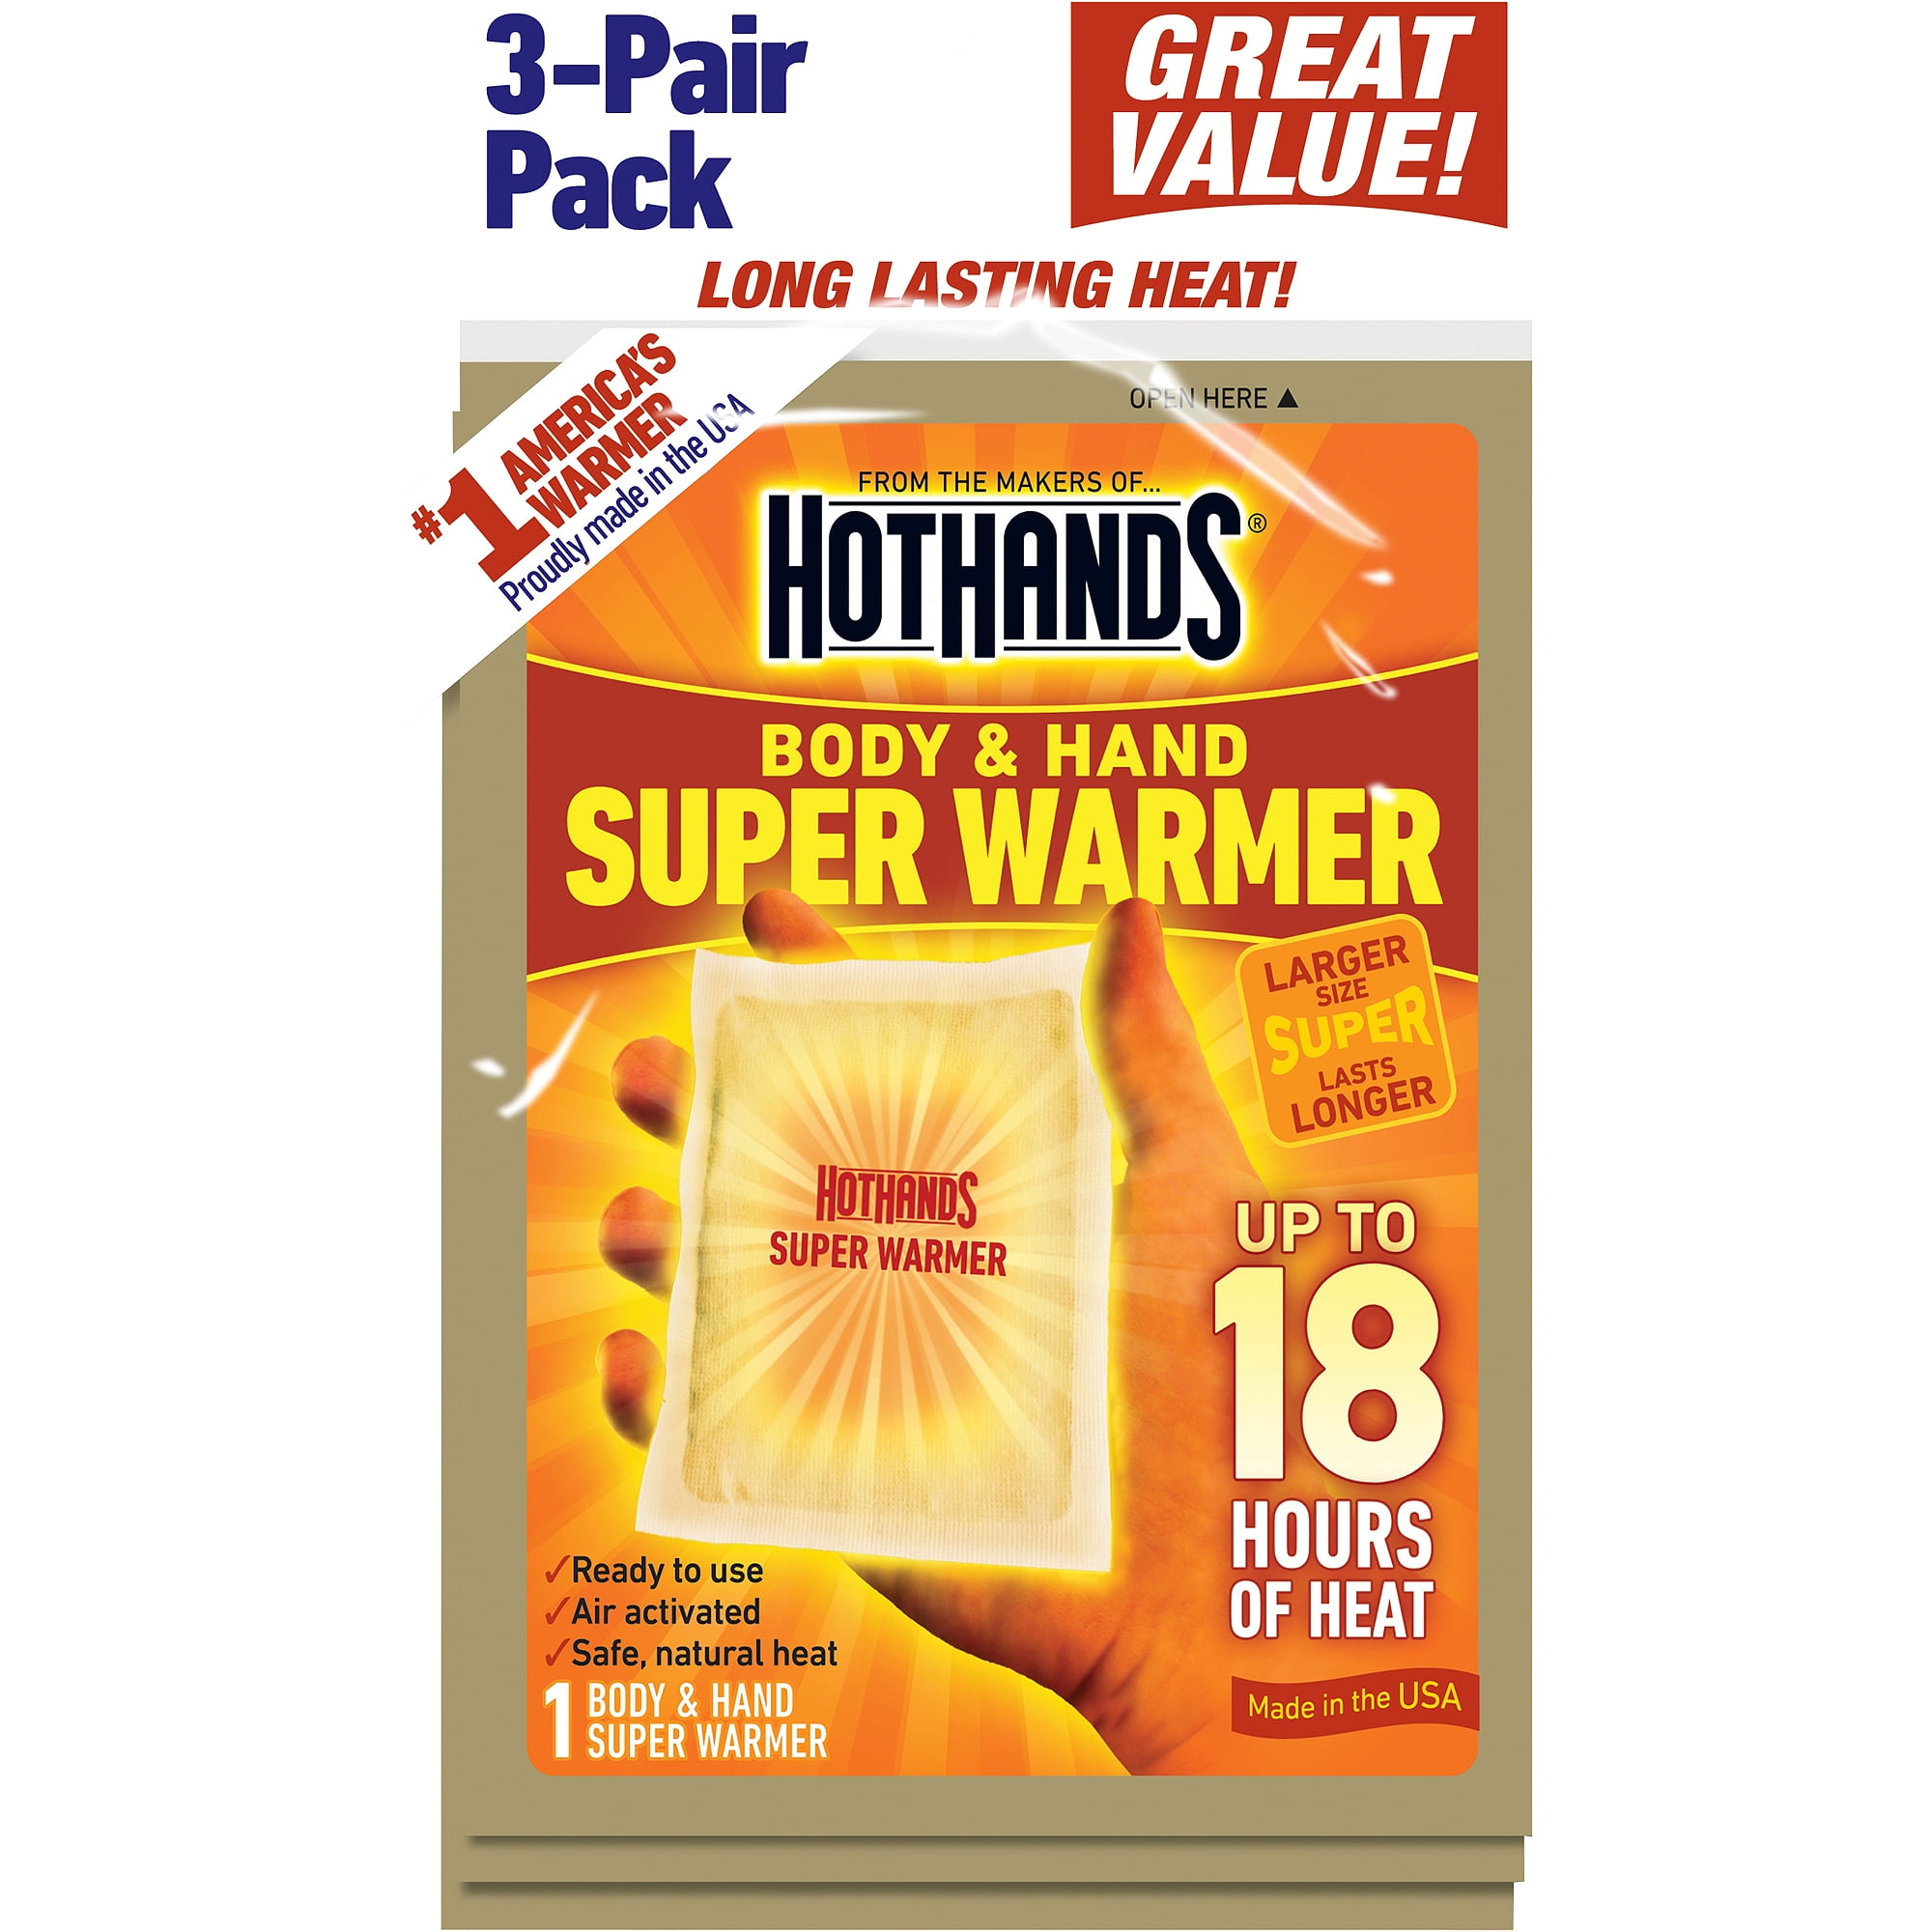 New Hot Hands Super Warmer Value Pack 10ct Large Lot of 2 20 Total Warmers 